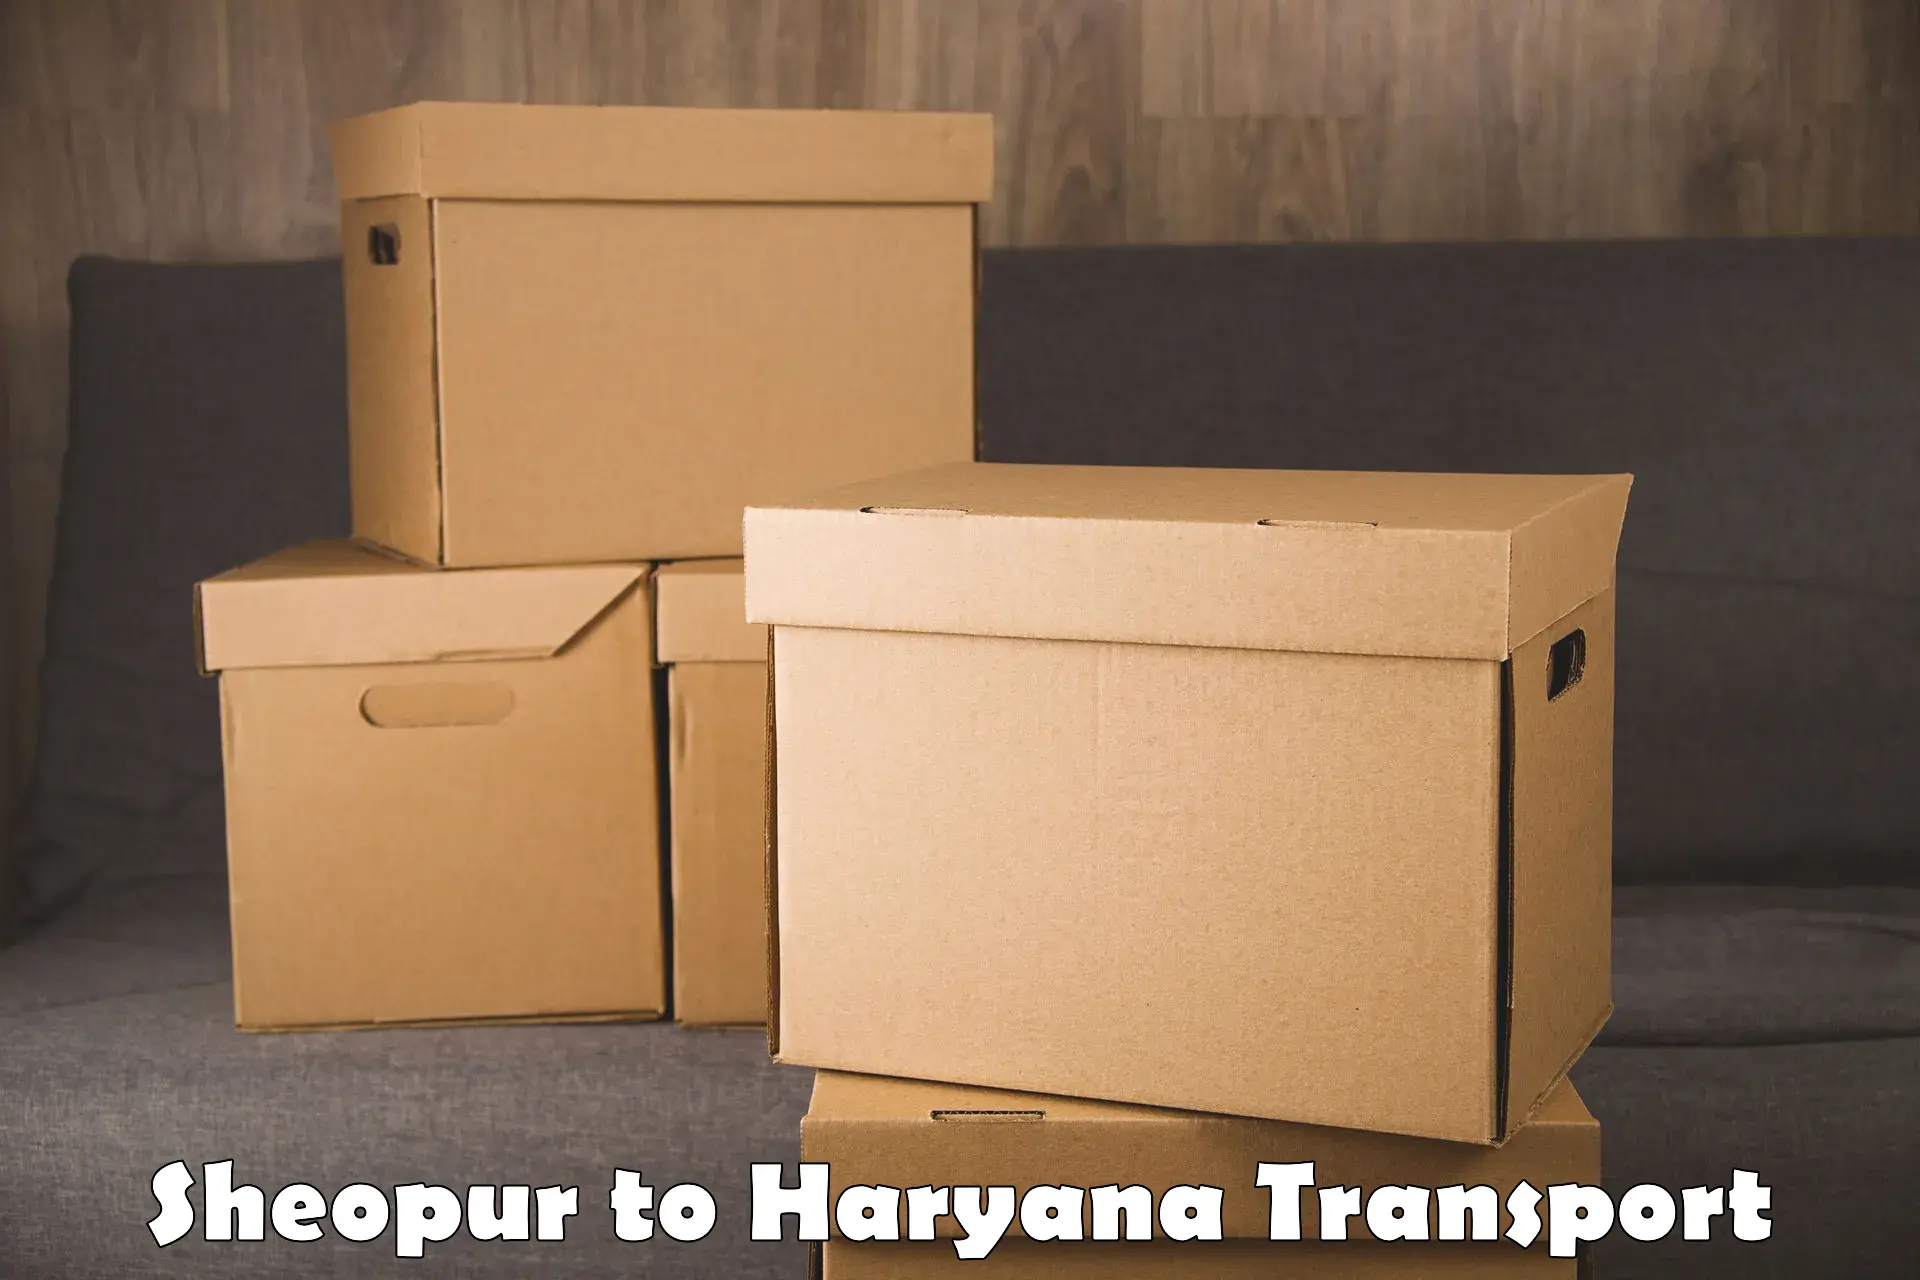 Domestic goods transportation services Sheopur to NCR Haryana